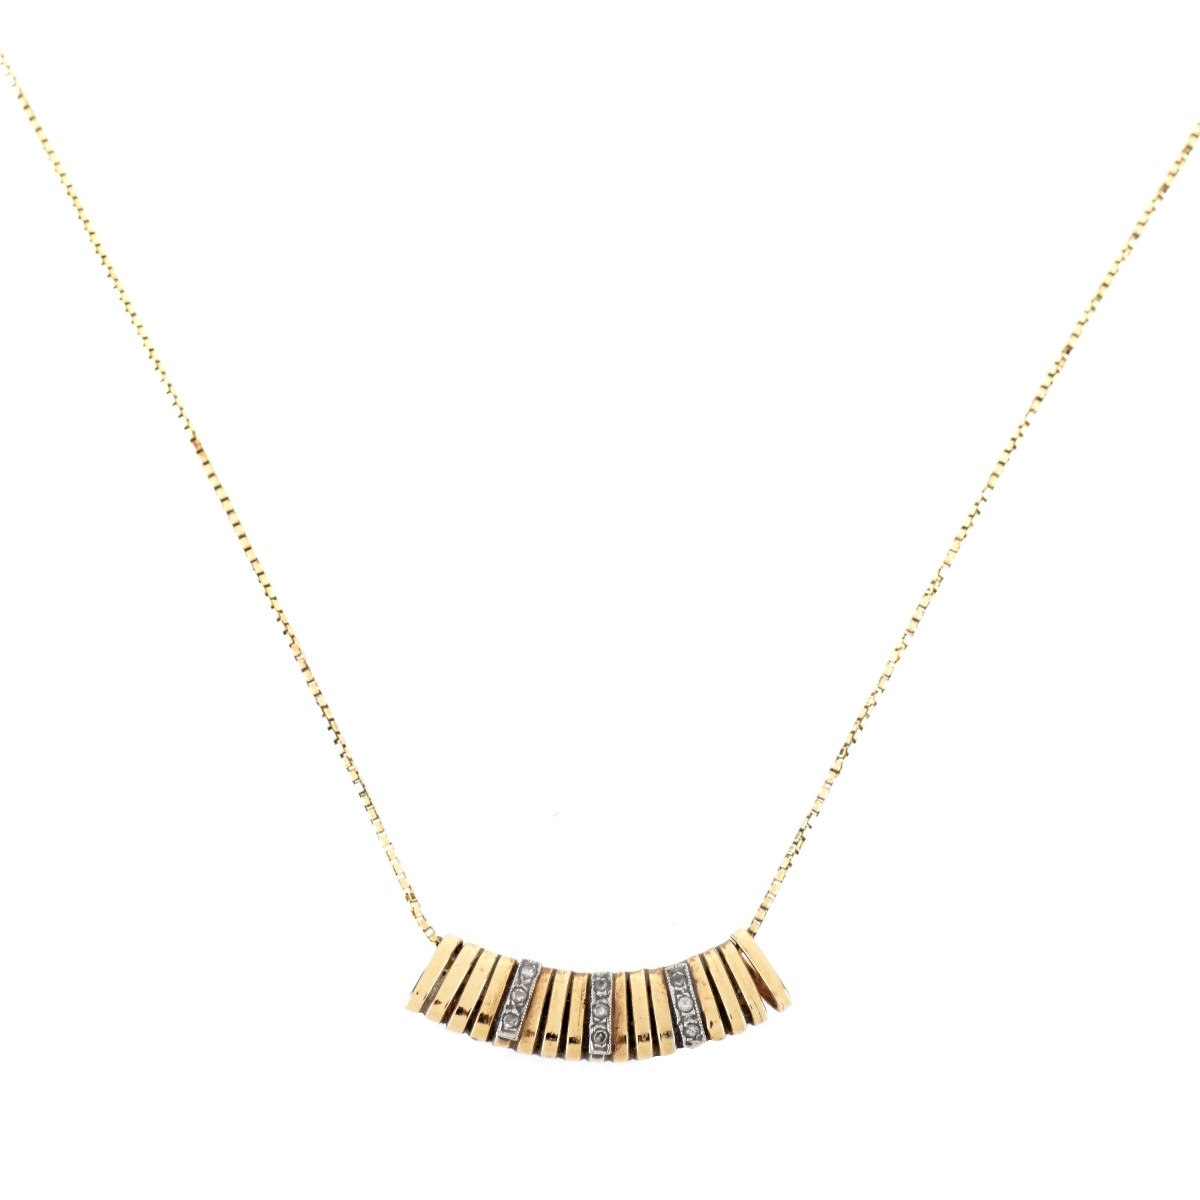 Delicate 14K and Diamond Necklace - Image 2 of 5